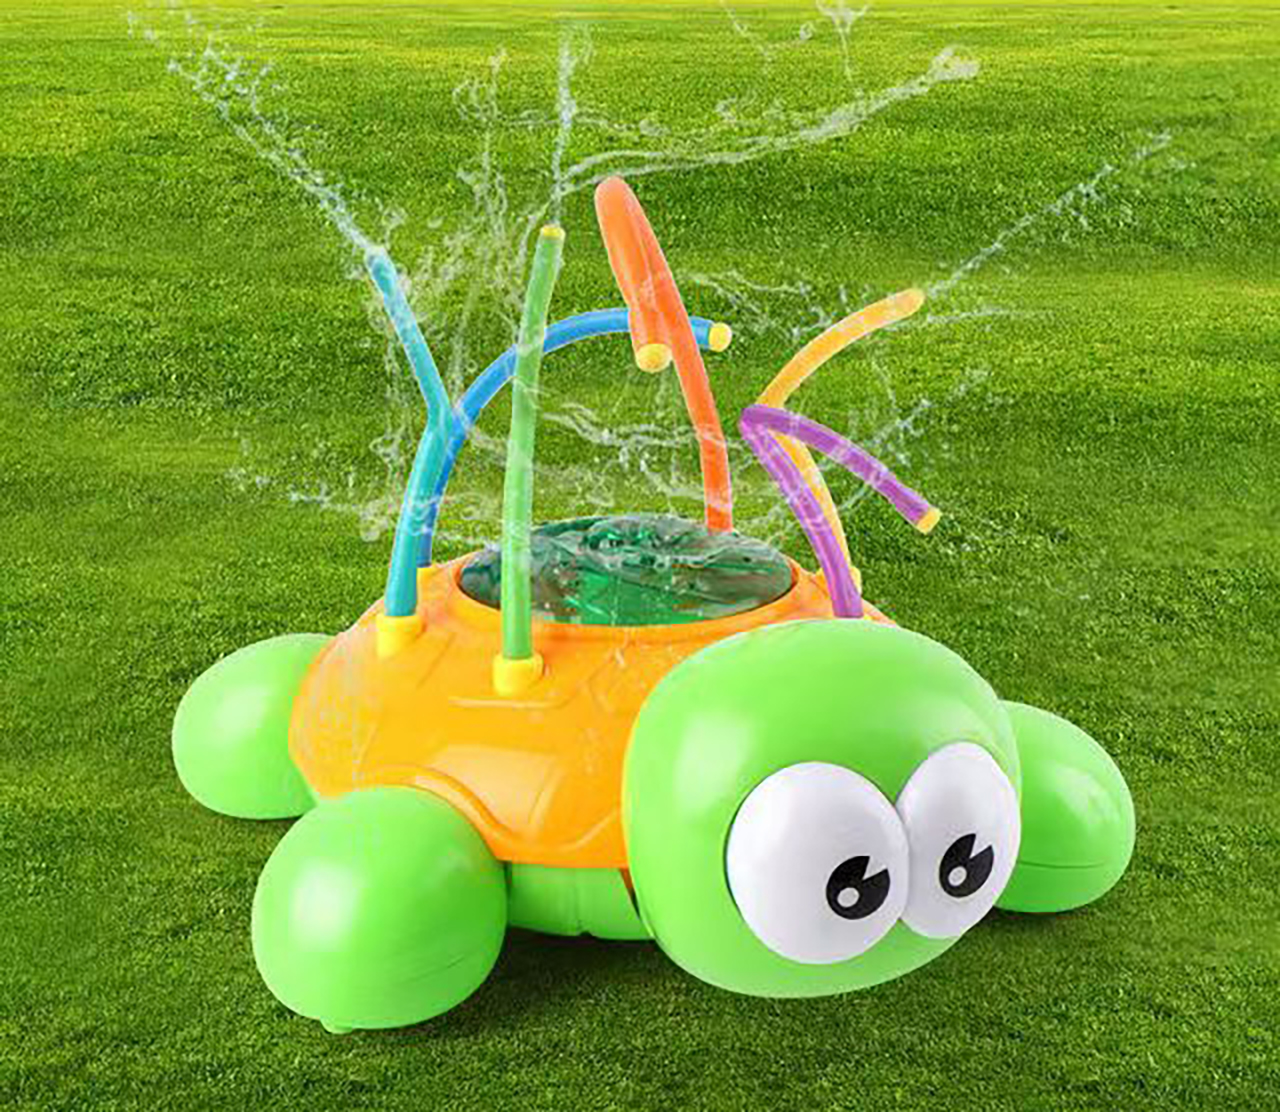 2CFun Sprinkler Toy for kids Water Fun Splash Play Toy Children Spinning Spray Turtle Outdoor Toys for Yard gift for Toddlers Boys Girls - image 2 of 6